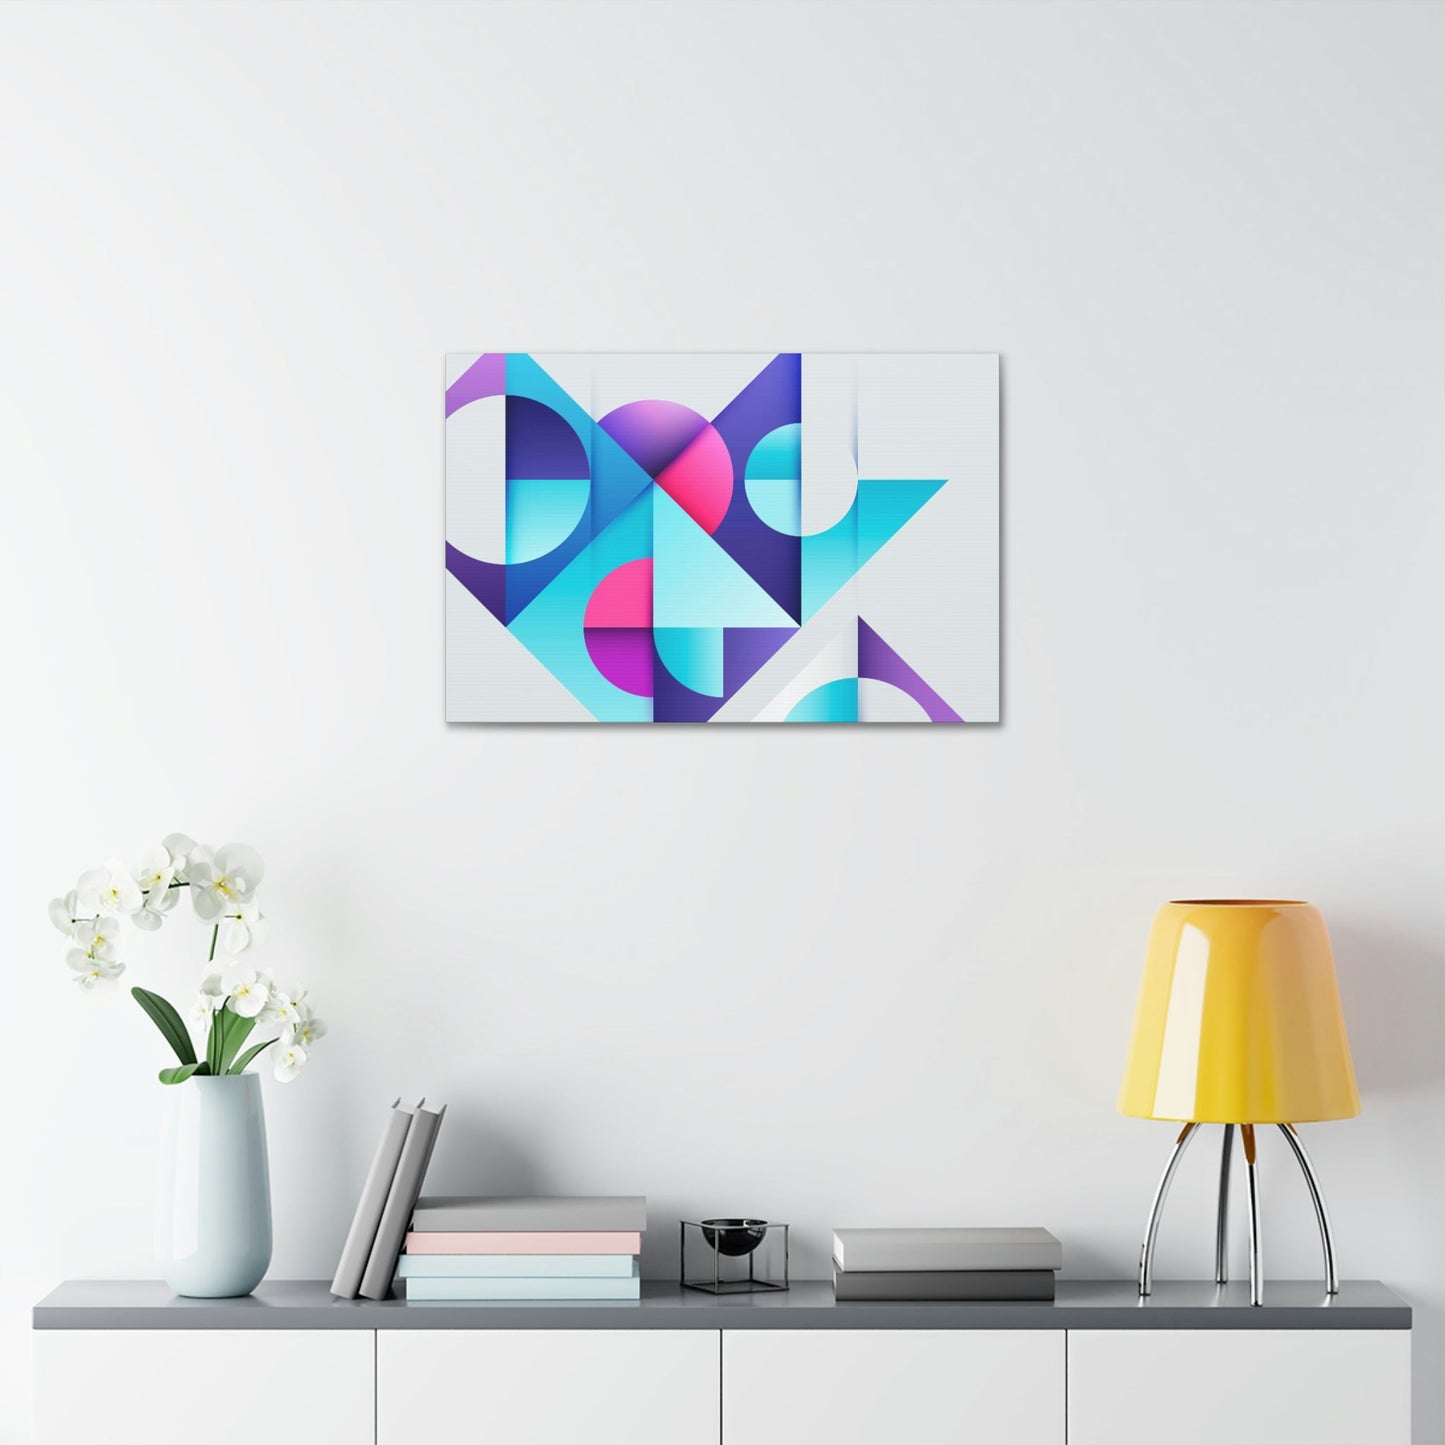 Geometric Shapes on Canvas: Contemporary Wall Art to Inspire